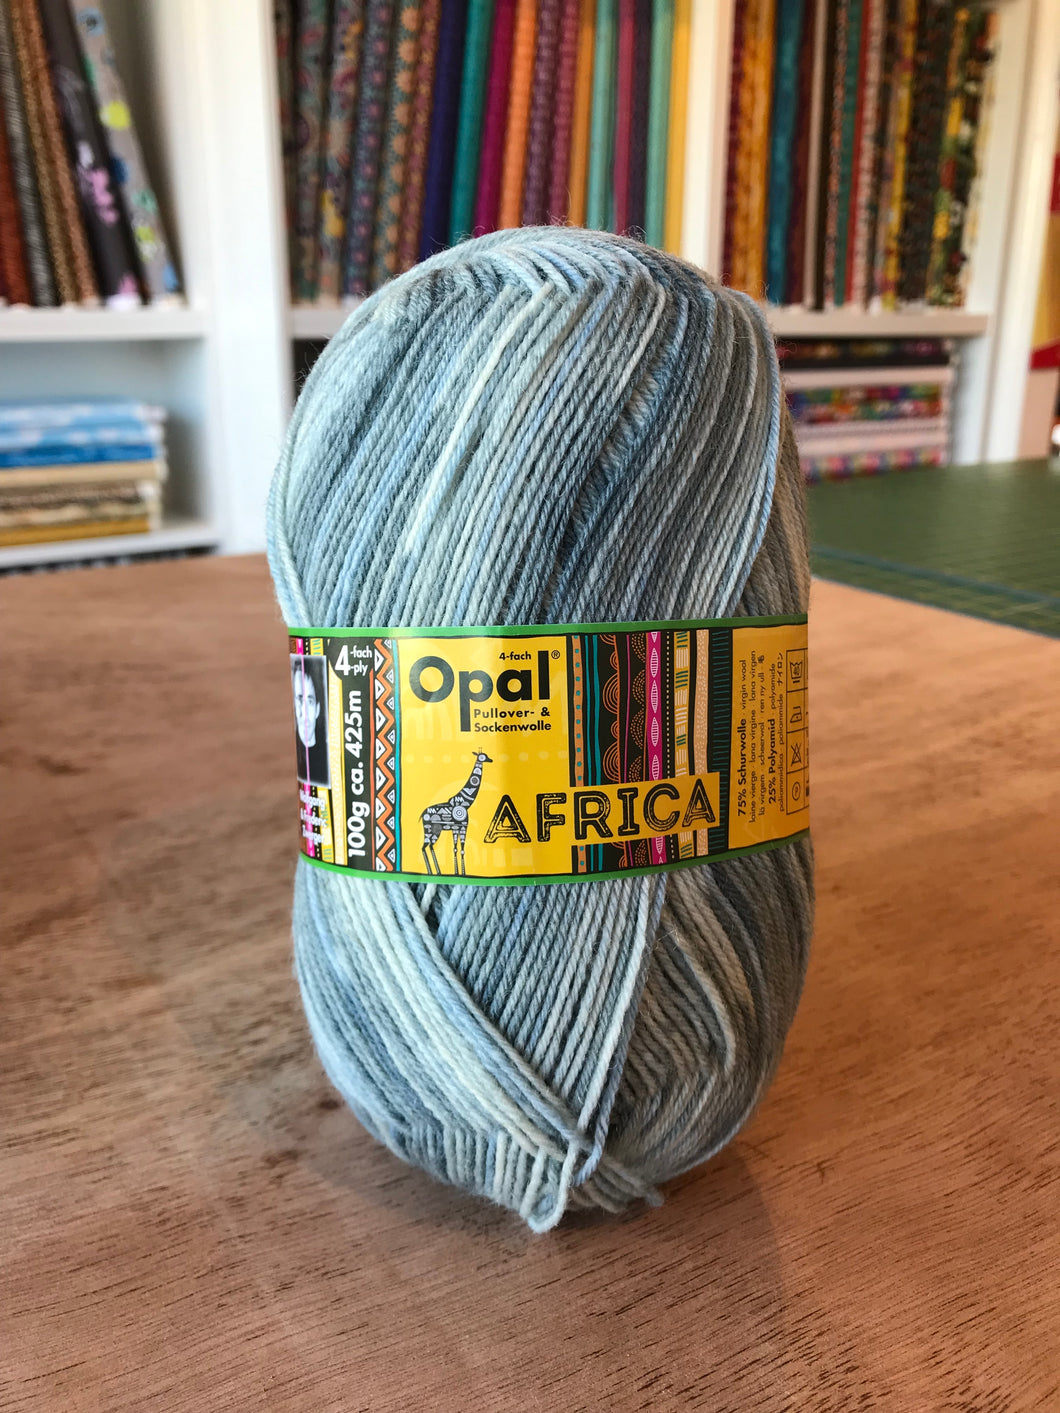 Opal - Africa - 4ply - Shade 11167